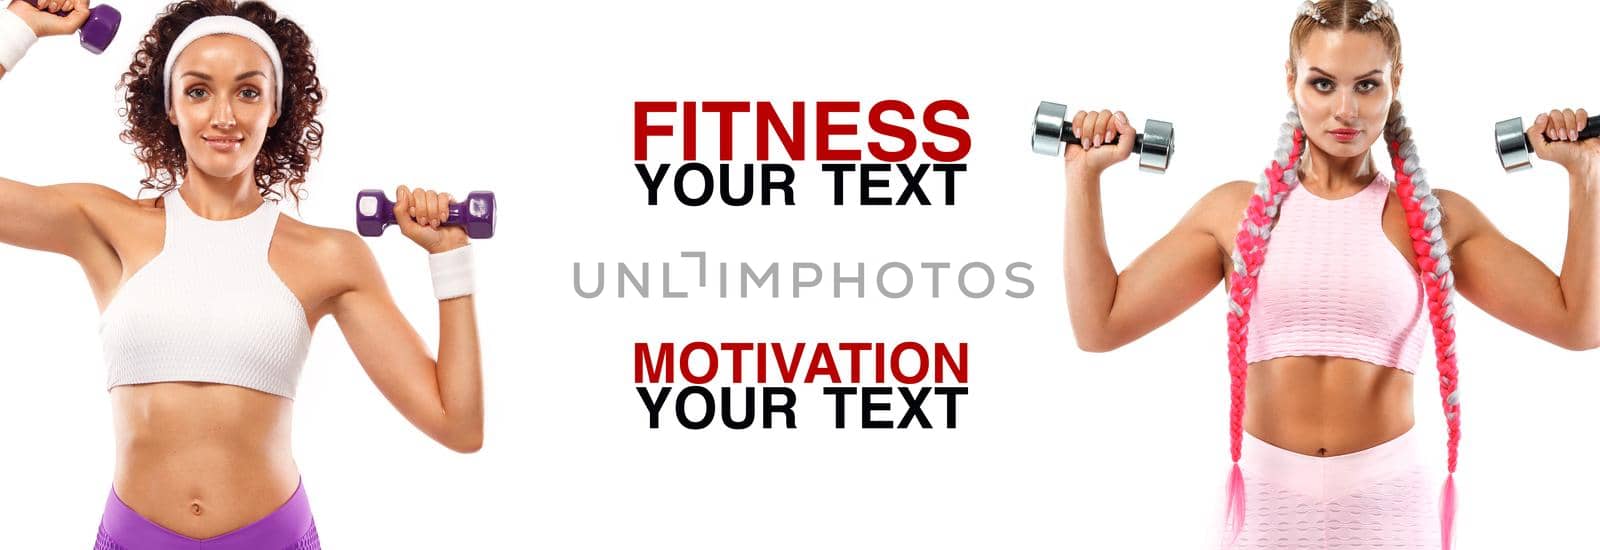 Attractive young fitness woman holding dumbell. Studio shot.